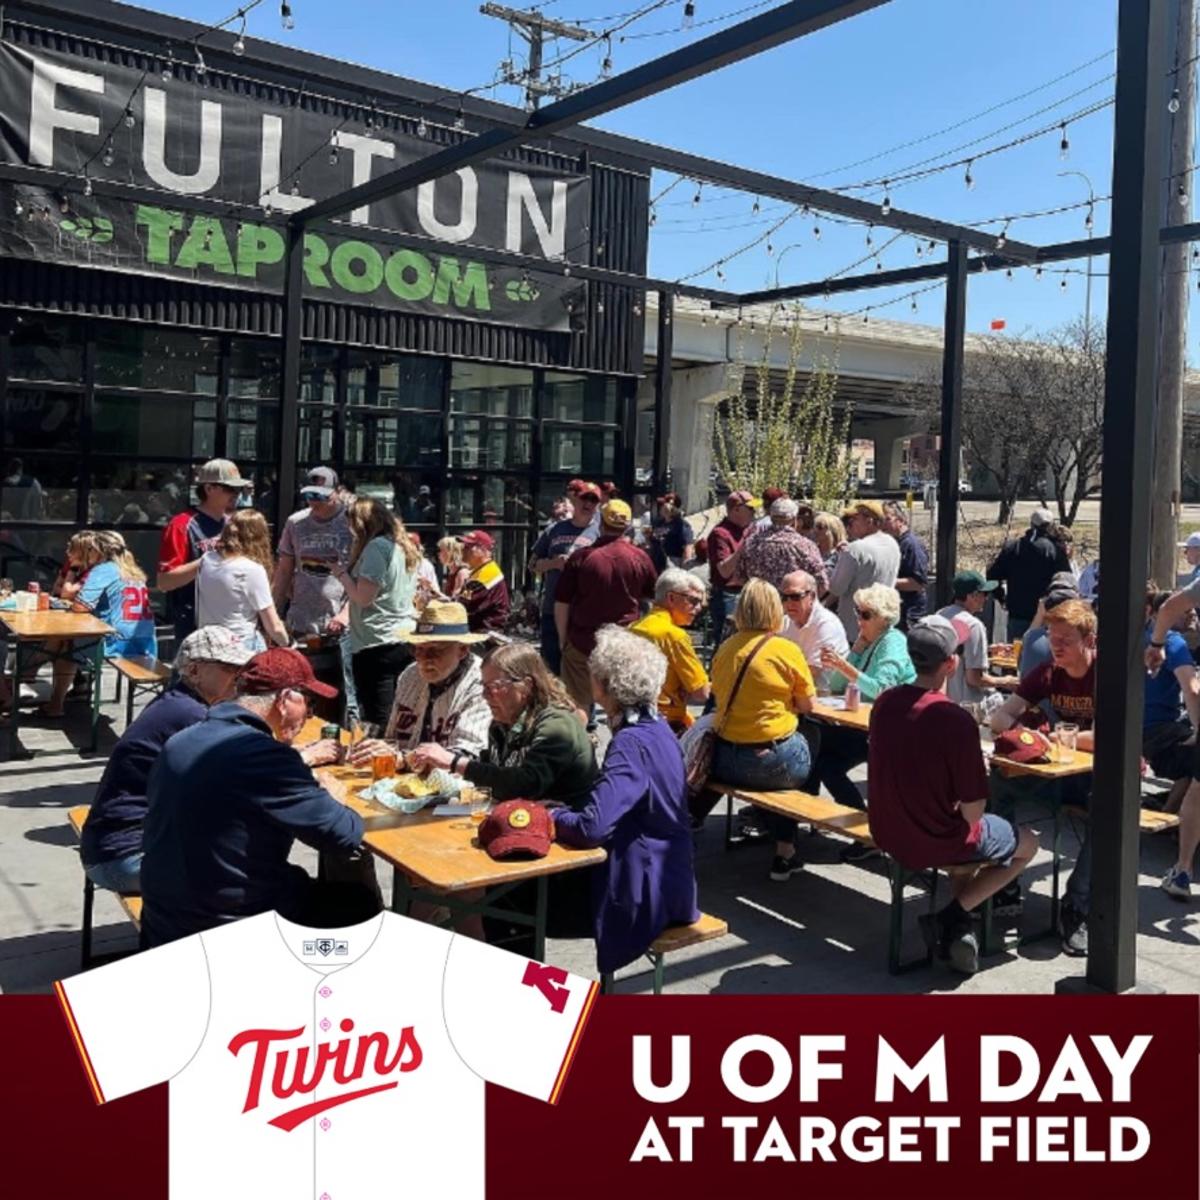 U of M Day at Target Field, pre-game at Fulton Taproom